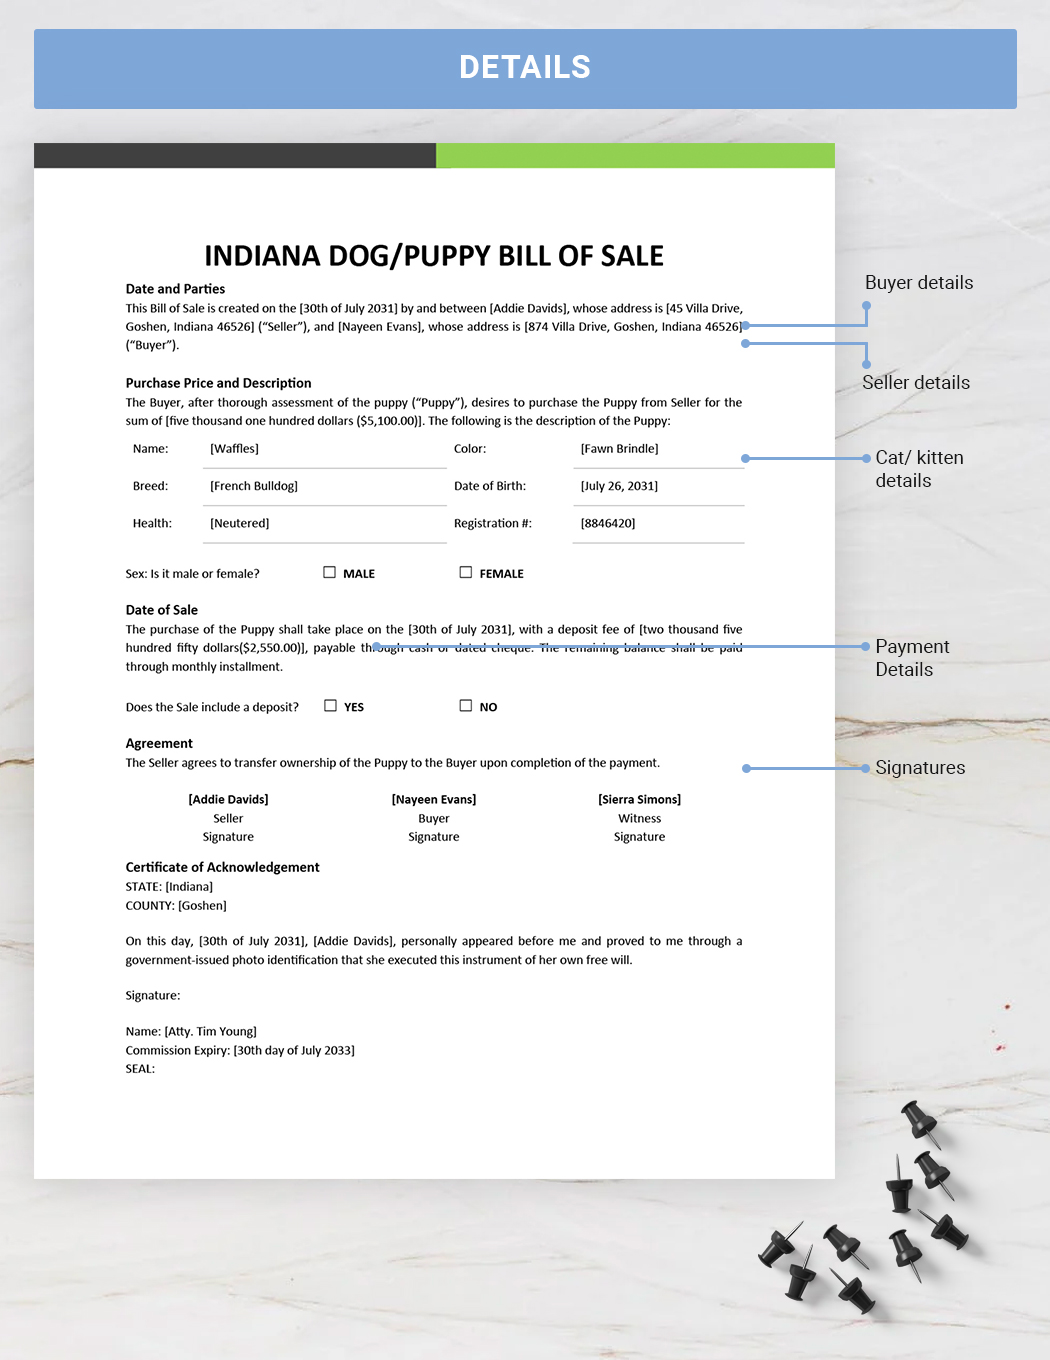 Indiana Dog / Puppy Bill of Sale Form Template